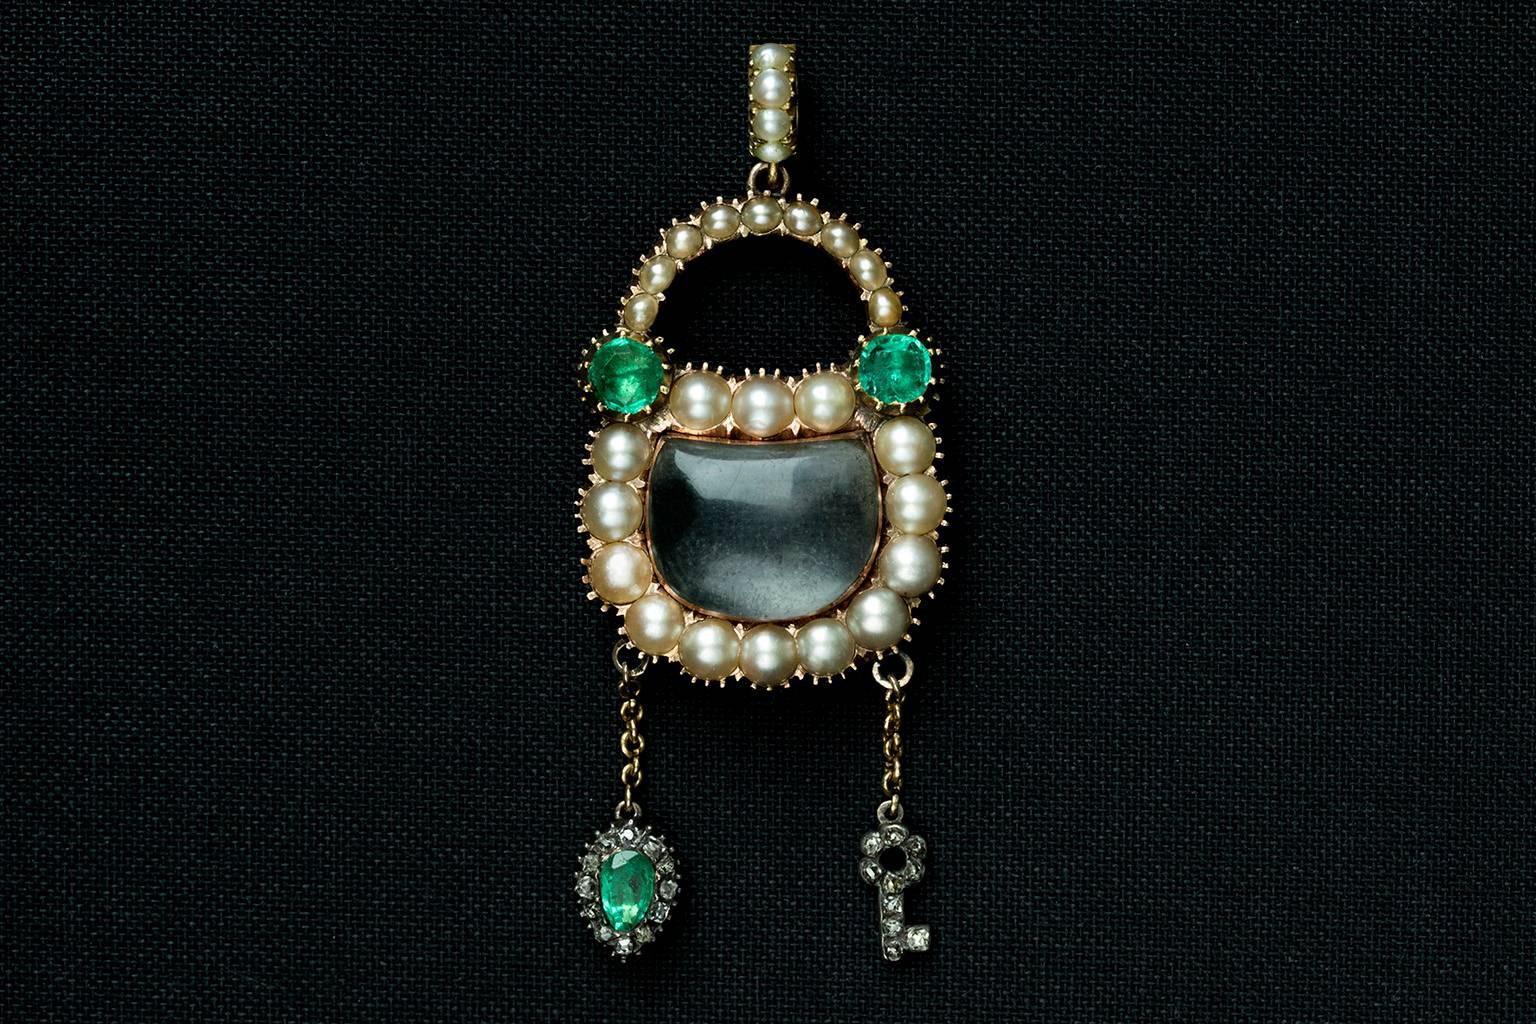 An early 19th century Georgian padlock pendant with a matching chain. The padlock is made of emeralds and pearls, and has a dangling diamond and emerald heart, and a diamond key. It also features the matching pearl bale, which makes the pendant more